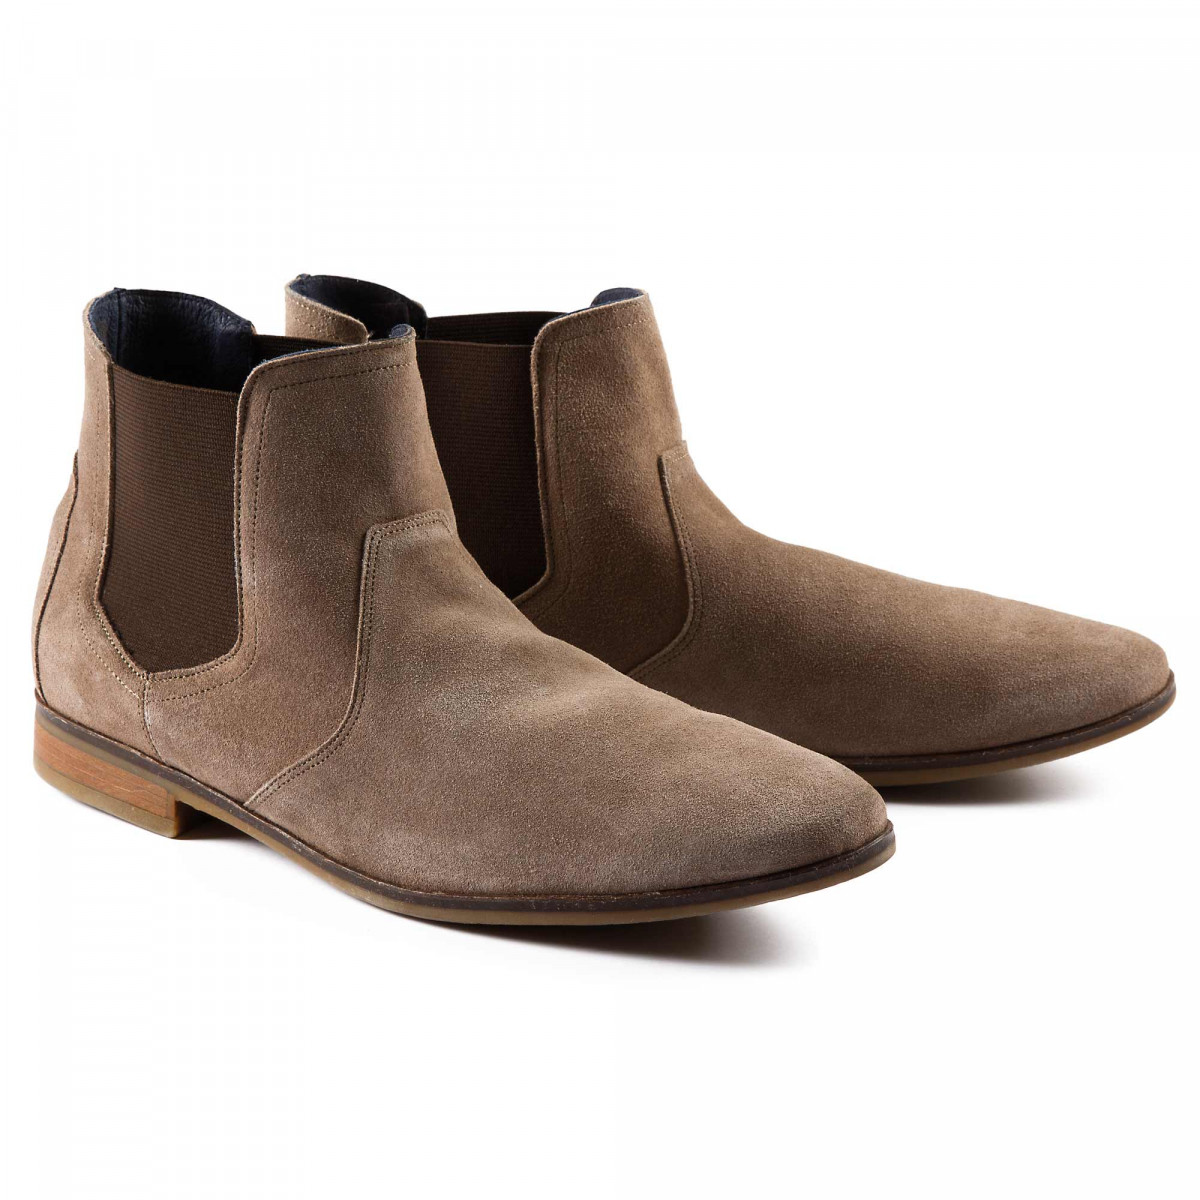 Boots cuir velours 44 Taupe